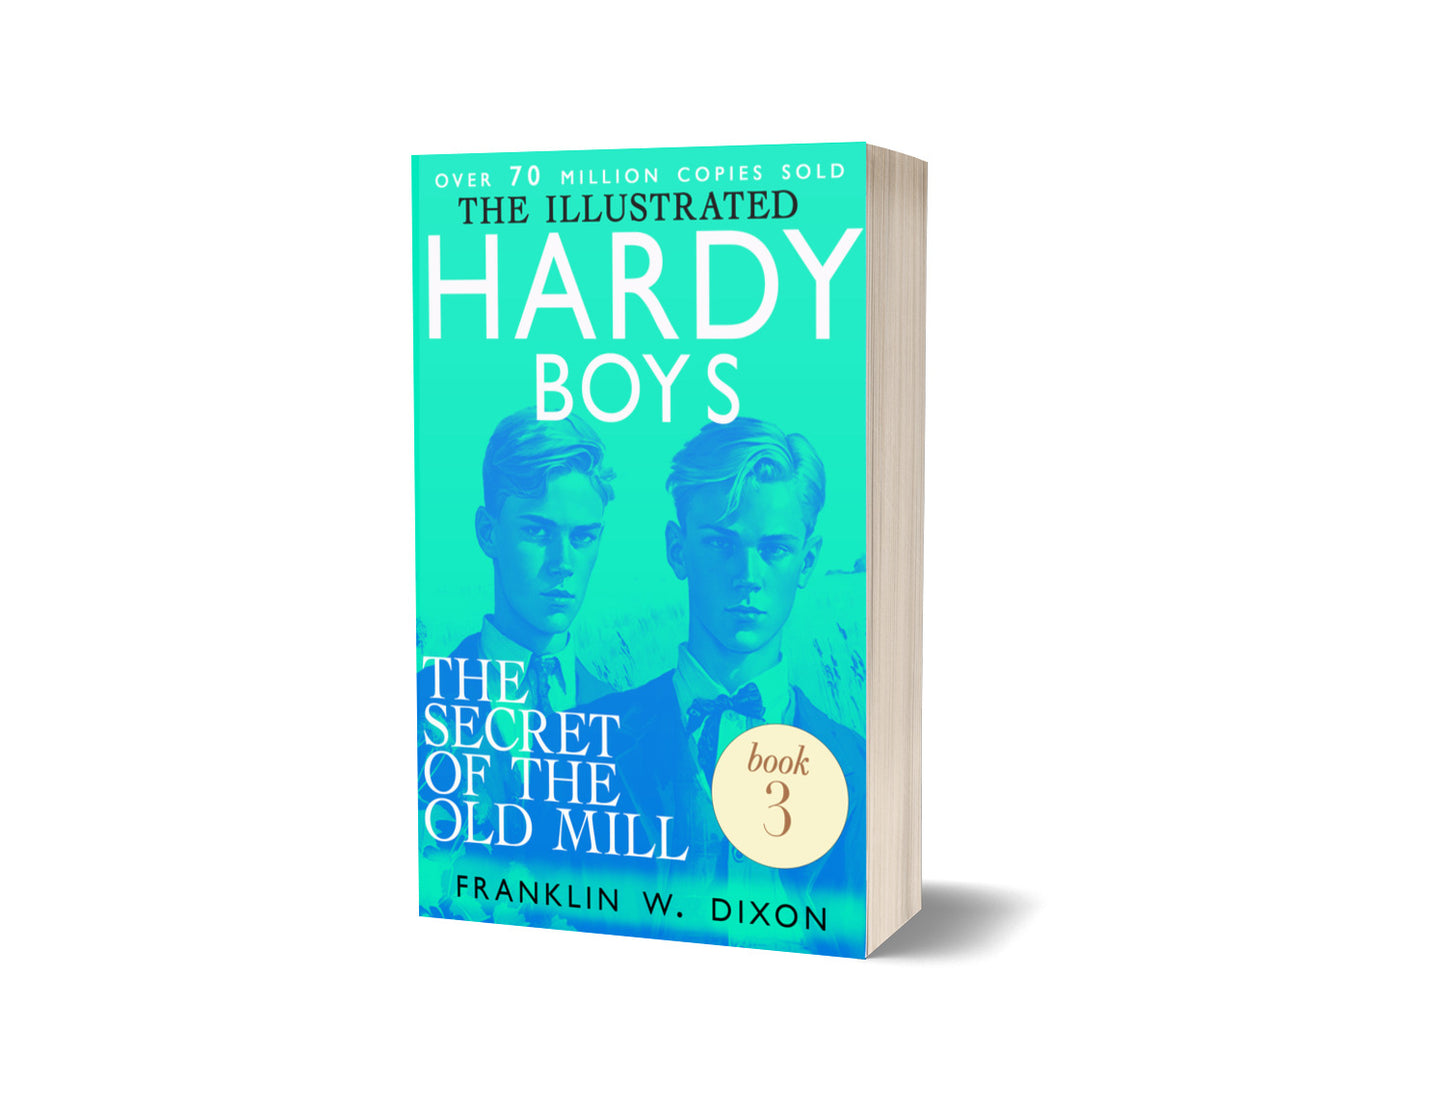 The Secret of the Old Mill (The Illustrated Hardy Boys Book 3)